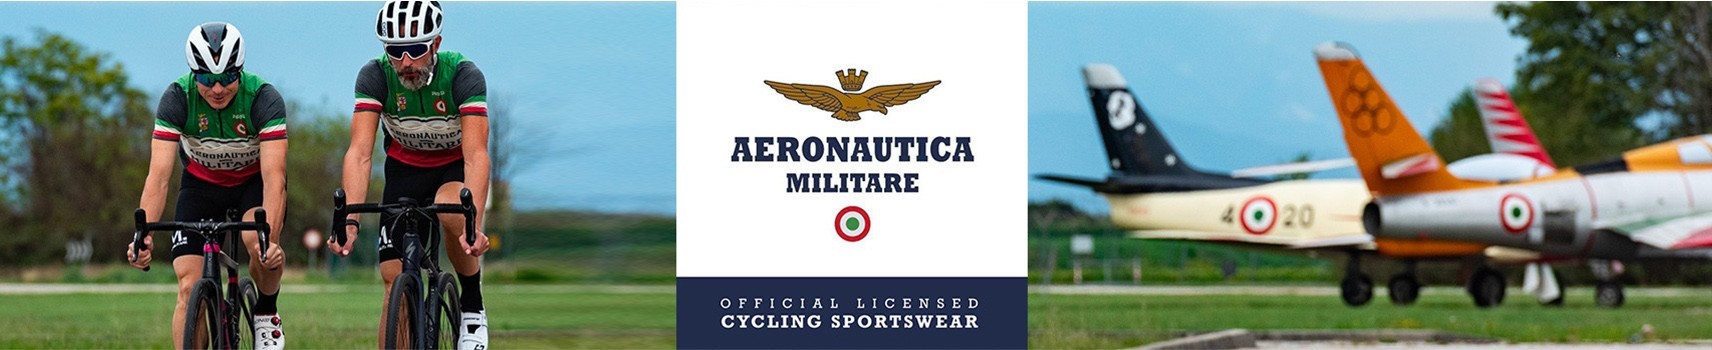 Official uniforms of the Italian Air Force